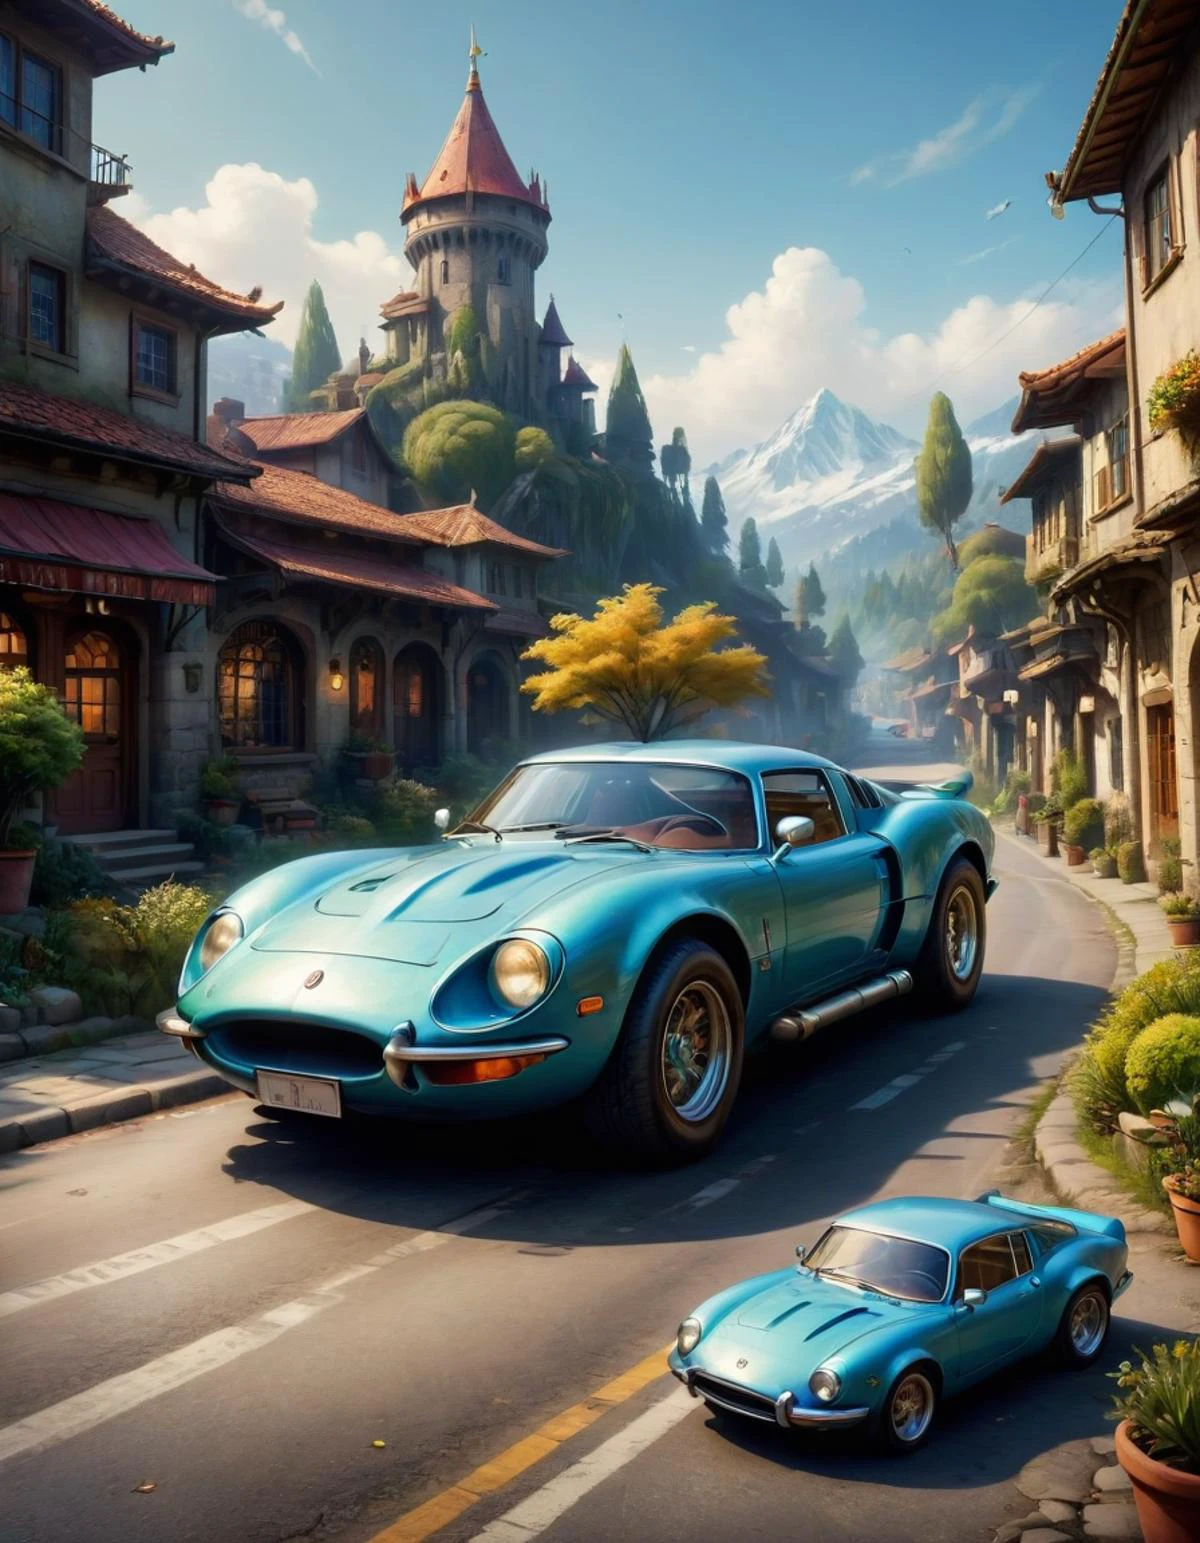 cinematic still Spyro the Dragon (Spyro the Dragon) and Snow Leopard in Maple Valley Raceway in Forza Motorsport 7 with its picturesque setting and challenging curves with simple, small, Groovy, Dappled Lighting, Kodak PIXPRO AZ901 with Built-in 4.3-258mm f/2.9-6.7, Panorama, Alternate Dimensions, Photocopy, DC Comics, Retropunk, Concept Art World, 1970s, Isometric View, asphalt, steel, pietra serena, needlerun net, stainless steel fiber, tiger's-eye, mendelevium, molded pulp, spandex, Cool Blue, Hydrogen, Romanticism, Film noir, DeviantArt, Minimalist, 200s, winter, midday, lonely, Burundian, bailiff, kitchen, Drone (Watch Dogs), Alternate Dimensions, Adventure Pulp, Jugendstil, Medieval, Split-Screen View, chromium, candid, gigantic, Cluttered, Sony A1 with Sony FE 20mm f/1.8 G, Astrophotography, Linear shading, Clockpunk, Concept Art World, 2400s, afternoon, Sizz, Free Camera, Watercolor painting, Flickr, asphalt, aluminium, verde antico, shweshwe, batting, feldspar, francium, bopet, microfiber, Thistle, Cyberprep . emotional, harmonious, vignette, 4k epic detailed, shot on kodak, 35mm photo, sharp focus, high budget, cinemascope, moody, epic, gorgeous, film grain, grainy, renaissance style Spyro the Dragon (Spyro the Dragon) and Snow Leopard in Maple Valley Raceway in Forza Motorsport 7 with its picturesque setting and challenging curves with simple, small, Groovy, Dappled Lighting, Kodak PIXPRO AZ901 with Built-in 4.3-258mm f/2.9-6.7, Panorama, Alternate Dimensions, Photocopy, DC Comics, Retropunk, Concept Art World, 1970s, Isometric View, asphalt, steel, pietra serena, needlerun net, stainless steel fiber, tiger's-eye, mendelevium, molded pulp, spandex, Cool Blue, Hydrogen, Romanticism, Film noir, DeviantArt, Minimalist, 200s, winter, midday, lonely, Burundian, bailiff, kitchen, Drone (Watch Dogs), Alternate Dimensions, Adventure Pulp, Jugendstil, Medieval, Split-Screen View, chromium, candid, gigantic, Cluttered, Sony A1 with Sony FE 20mm f/1.8 G, Astrophotography, Linear shading, Clockpunk, Concept Art World, 2400s, afternoon, Sizz, Free Camera, Watercolor painting, Flickr, asphalt, aluminium, verde antico, shweshwe, batting, feldspar, francium, bopet, microfiber, Thistle, Cyberprep . realistic, perspective, light and shadow, religious or mythological themes, highly detailed, Faetastic, perfecteyes, ral-ledlights, ral-dstgrtptrn, embedding:OverallDetailXL:1.0, Spyro the Dragon (Spyro the Dragon) and Snow Leopard in Maple Valley Raceway in Forza Motorsport 7 with its picturesque setting and challenging curves with simple, small, Groovy, Dappled Lighting, Kodak PIXPRO AZ901 with Built-in 4.3-258mm f/2.9-6.7, Panorama, Alternate Dimensions, Photocopy, DC Comics, Retropunk, Concept Art World, 1970s, Isometric View, asphalt, steel, pietra serena, needlerun net, stainless steel fiber, tiger's-eye, mendelevium, molded pulp, spandex, Cool Blue, Hydrogen, Romanticism, Film noir, DeviantArt, Minimalist, 200s, winter, midday, , Burundian, bailiff, kitchen, Drone (Watch Dogs), Alternate Dimensions, Adventure Pulp, Jugendstil, Medieval, Split-Screen View, chromium, candid, gigantic, Cluttered, Sony A1 with Sony FE 20mm f/1.8 G, Astrophotography, Linear shading, Clockpunk, Concept Art World, 2400s, afternoon, Sizz, Free Camera, Watercolor painting, Flickr, asphalt, aluminium, verde antico, shweshwe, batting, feldspar, francium, bopet, microfiber, Thistle, Cyberprep, set